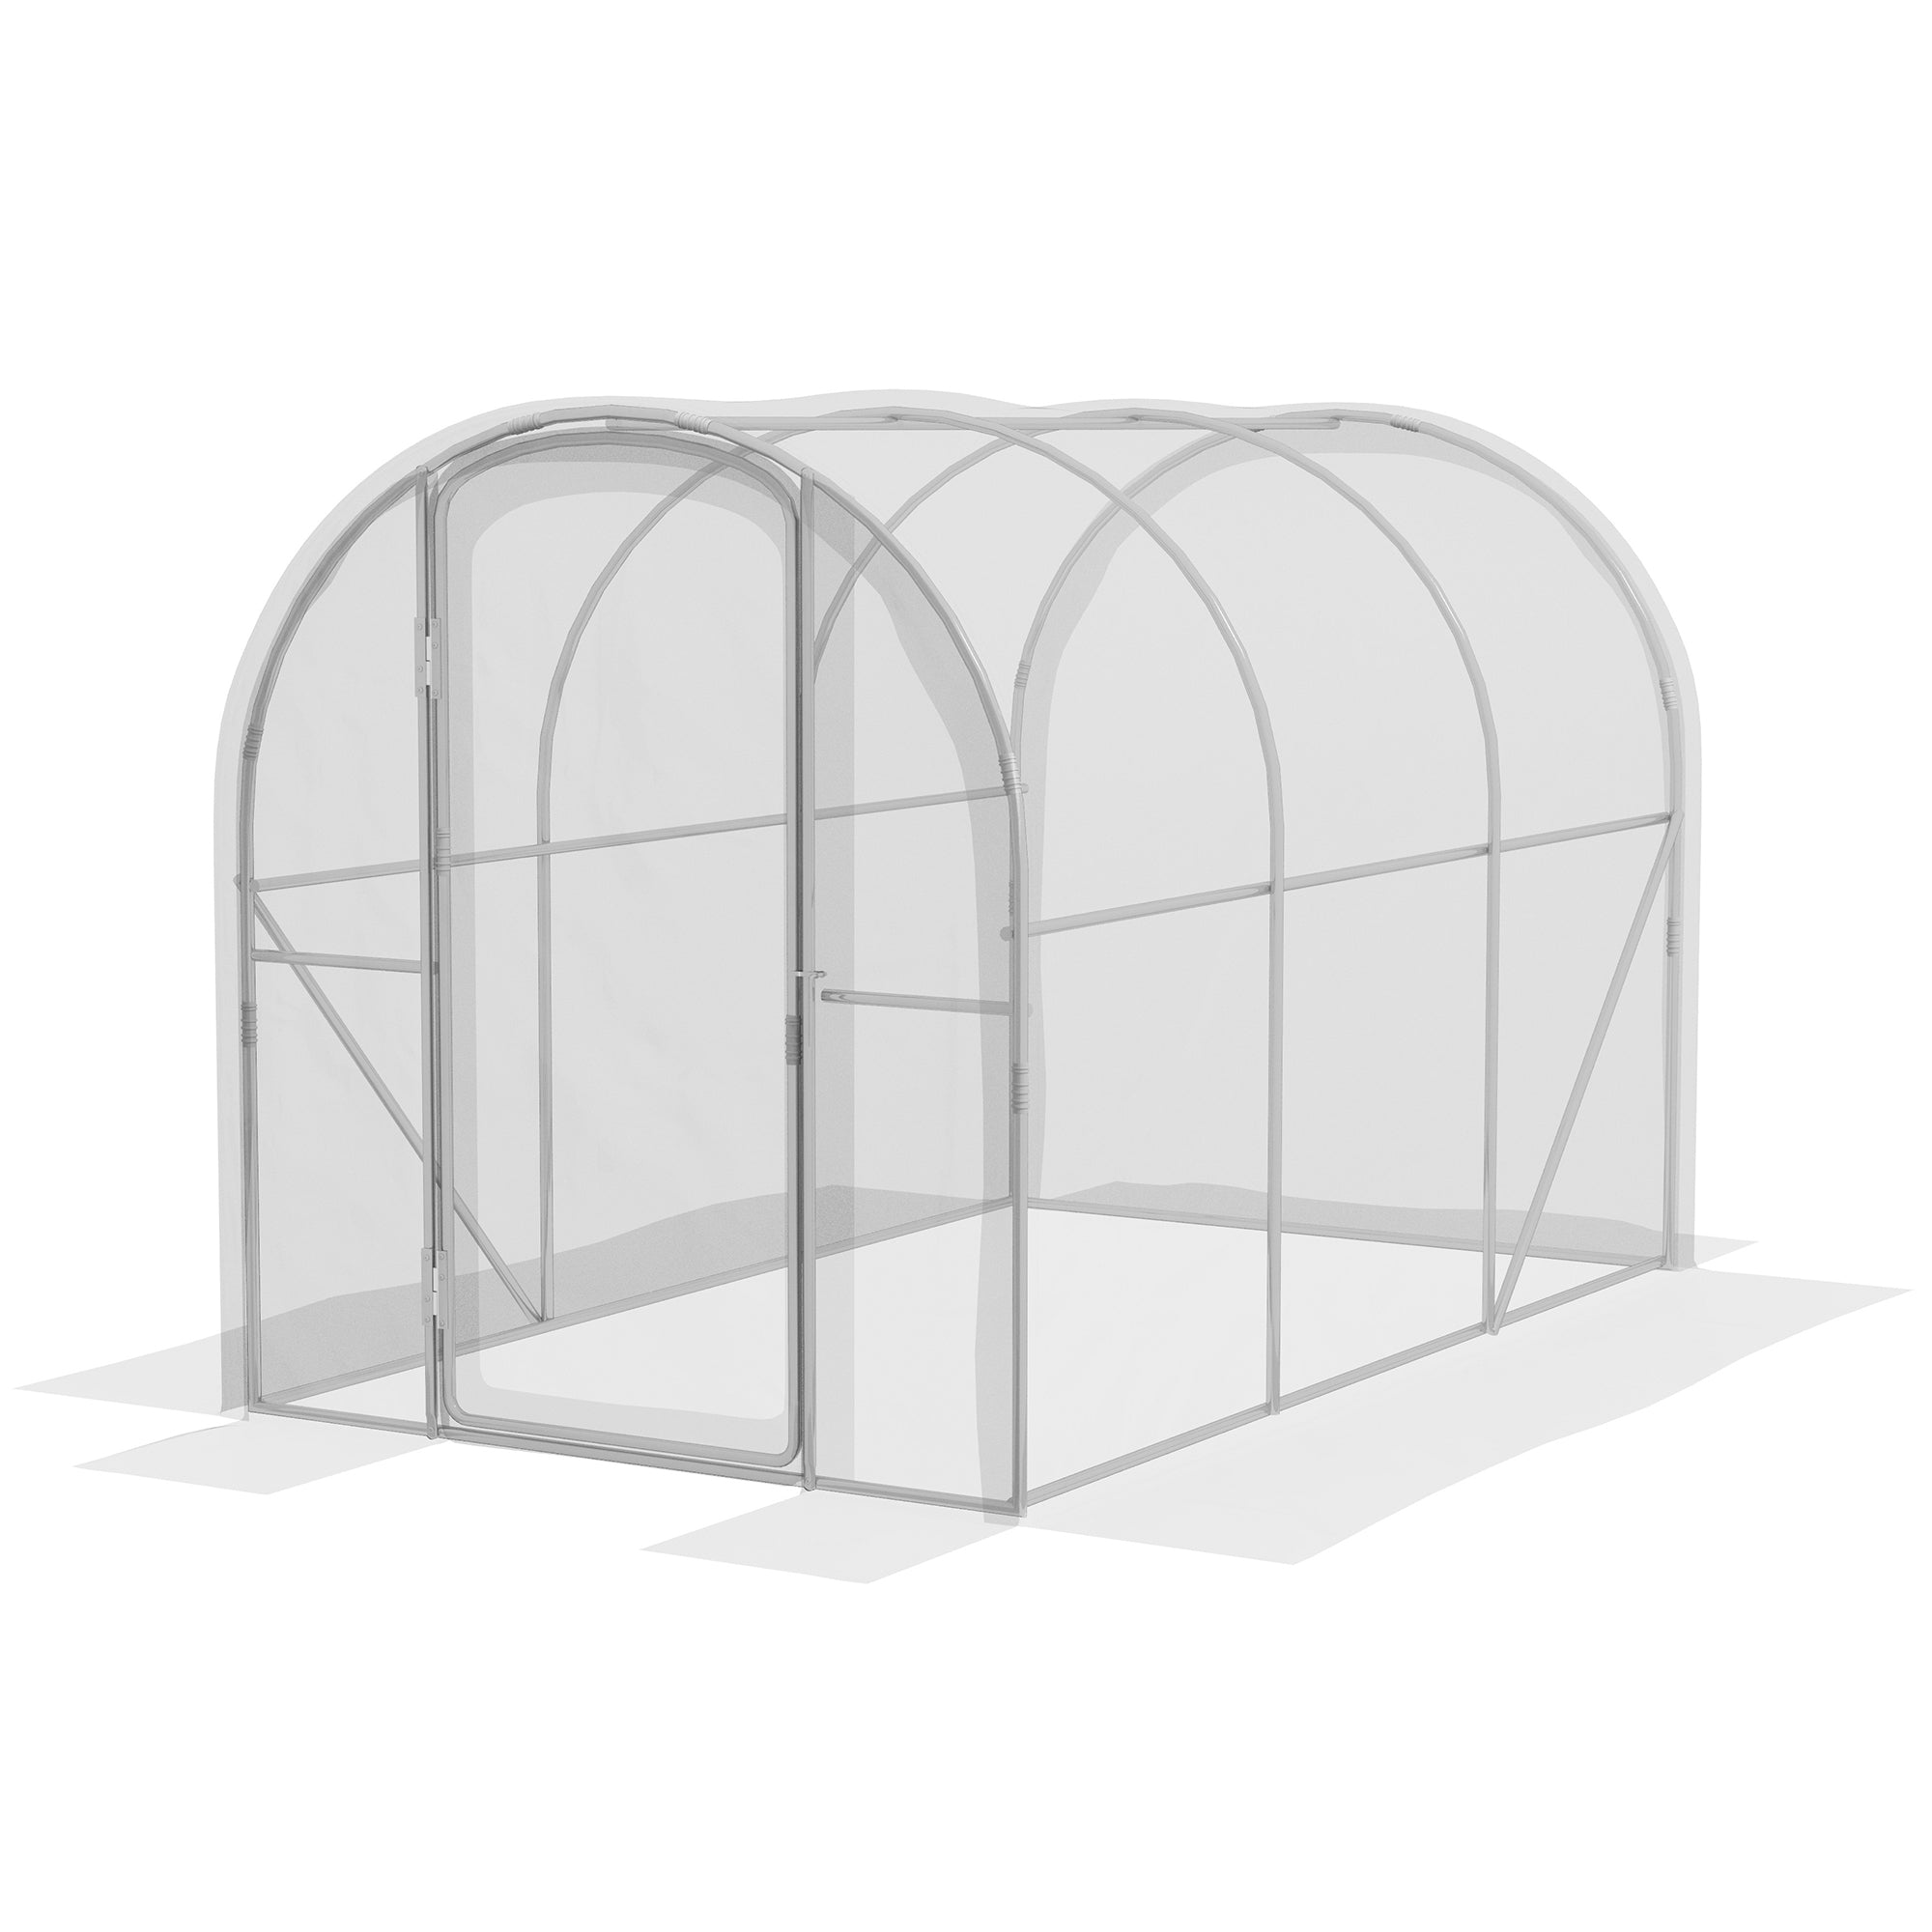 Polytunnel Greenhouse Walk-in Grow House with PE Cover, Door and Galvanised Steel Frame, 3 x 2 x 2m, Clear-0